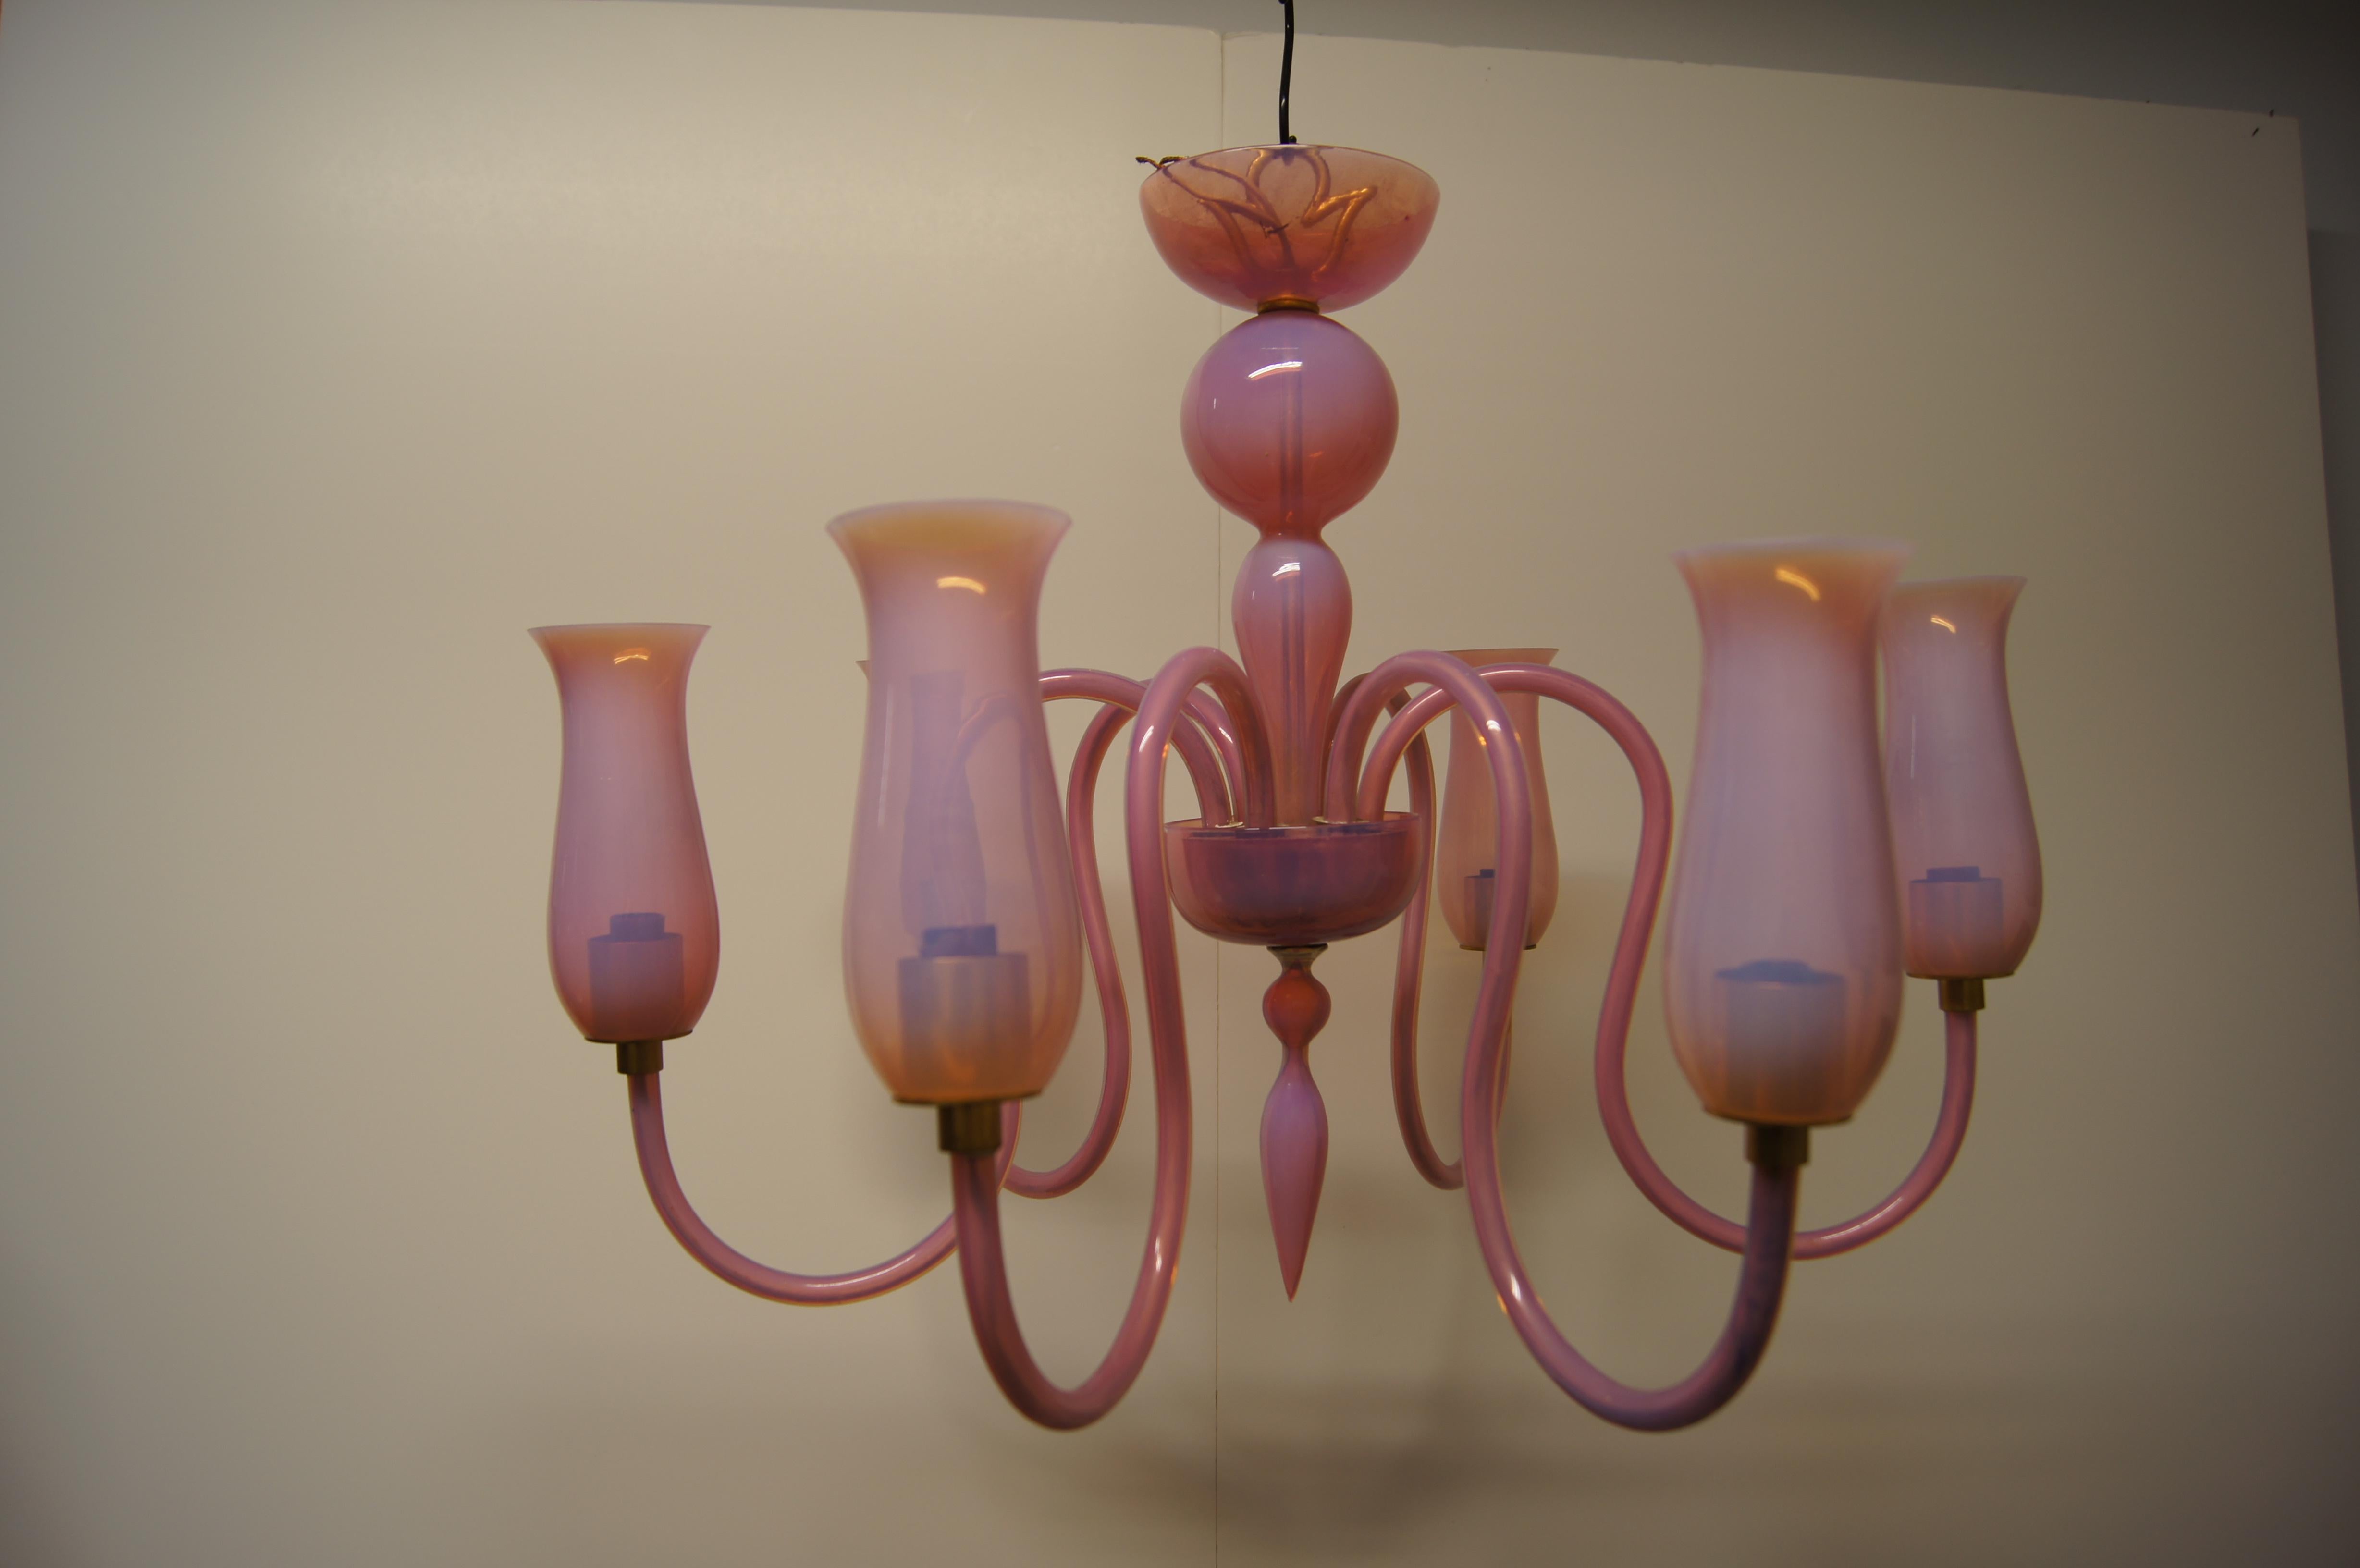 This lovely chandelier of pink Murano glass was created in 1950s Venice. Radiating in undulations from a central stack of varied blown-glass shapes, six glass arms end in tall blown-glass vessels set over the lamps.